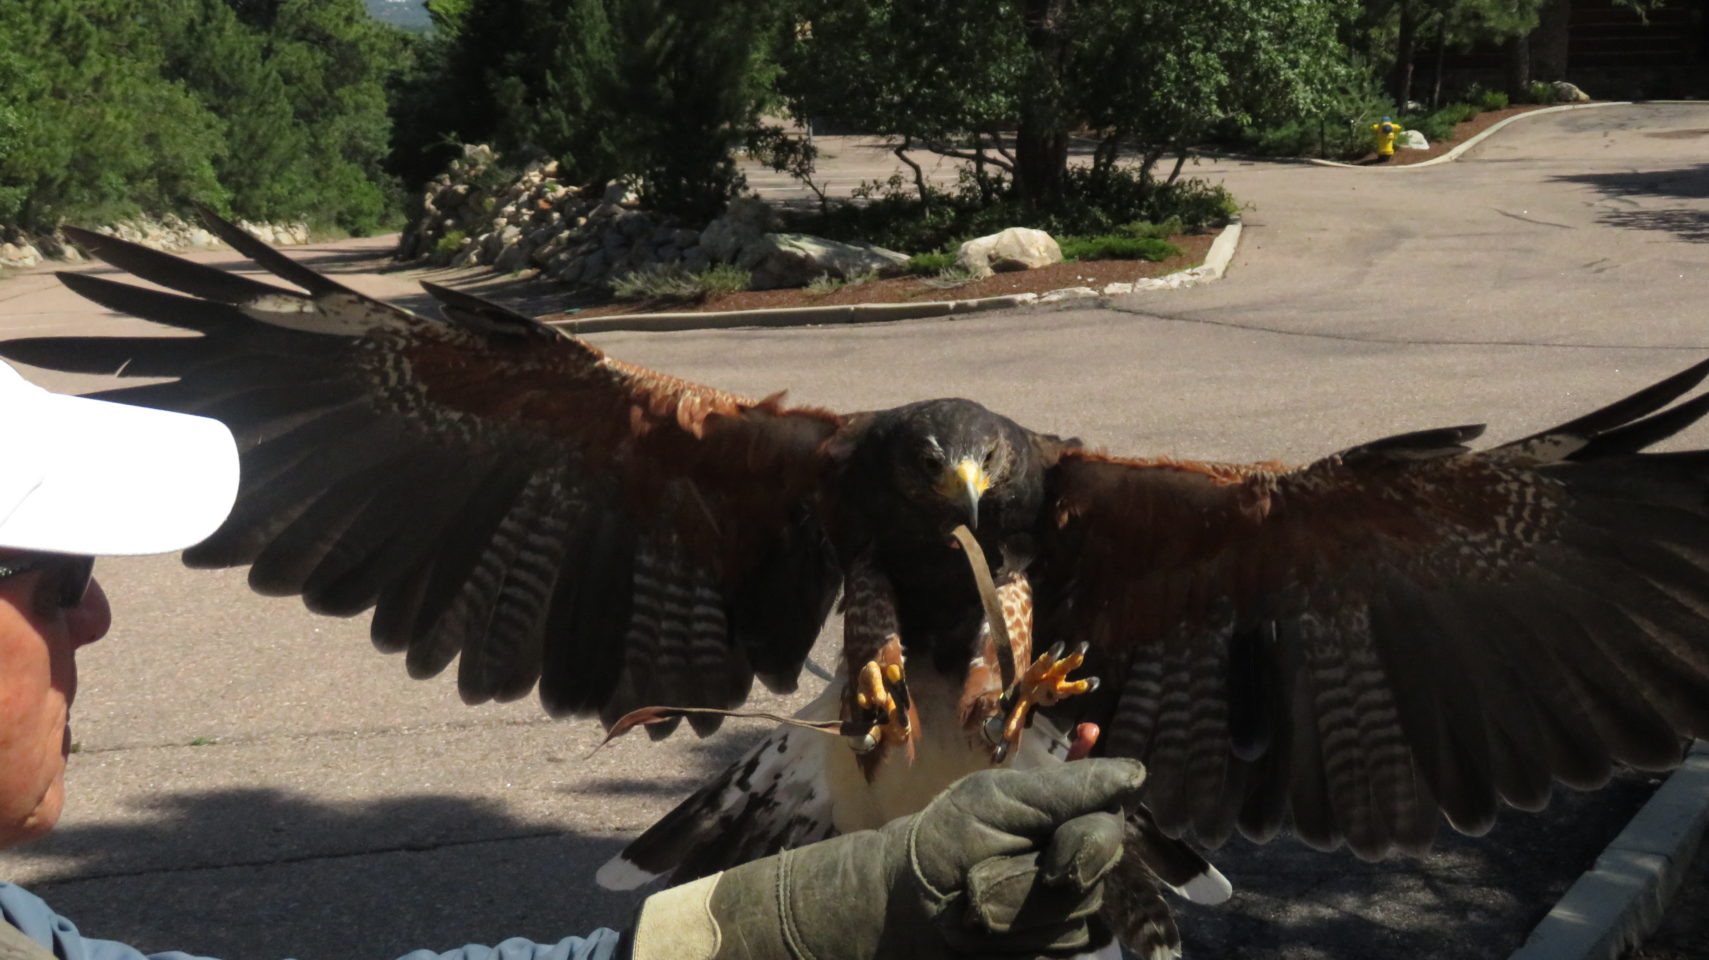 Julie, the harris hawk, in her final landing approach onto the welcoming hand of master falconer Dan